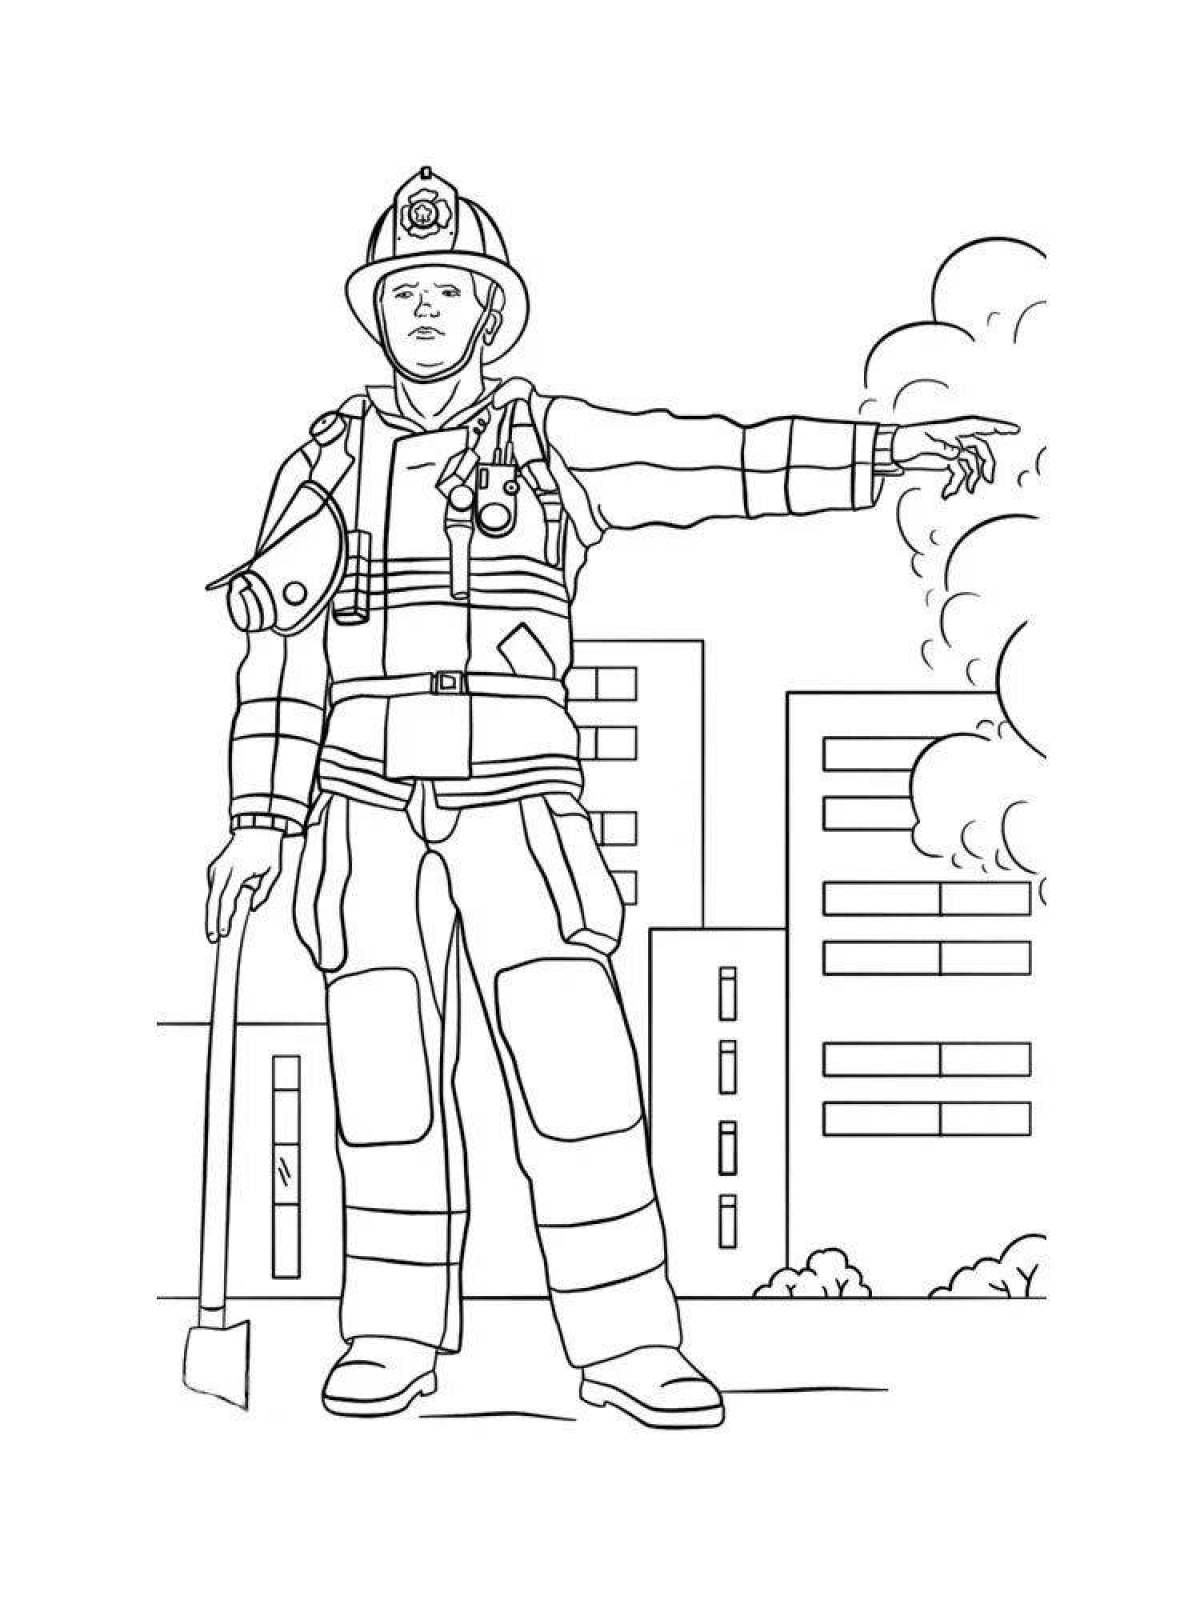 Coloring book exciting profession fireman